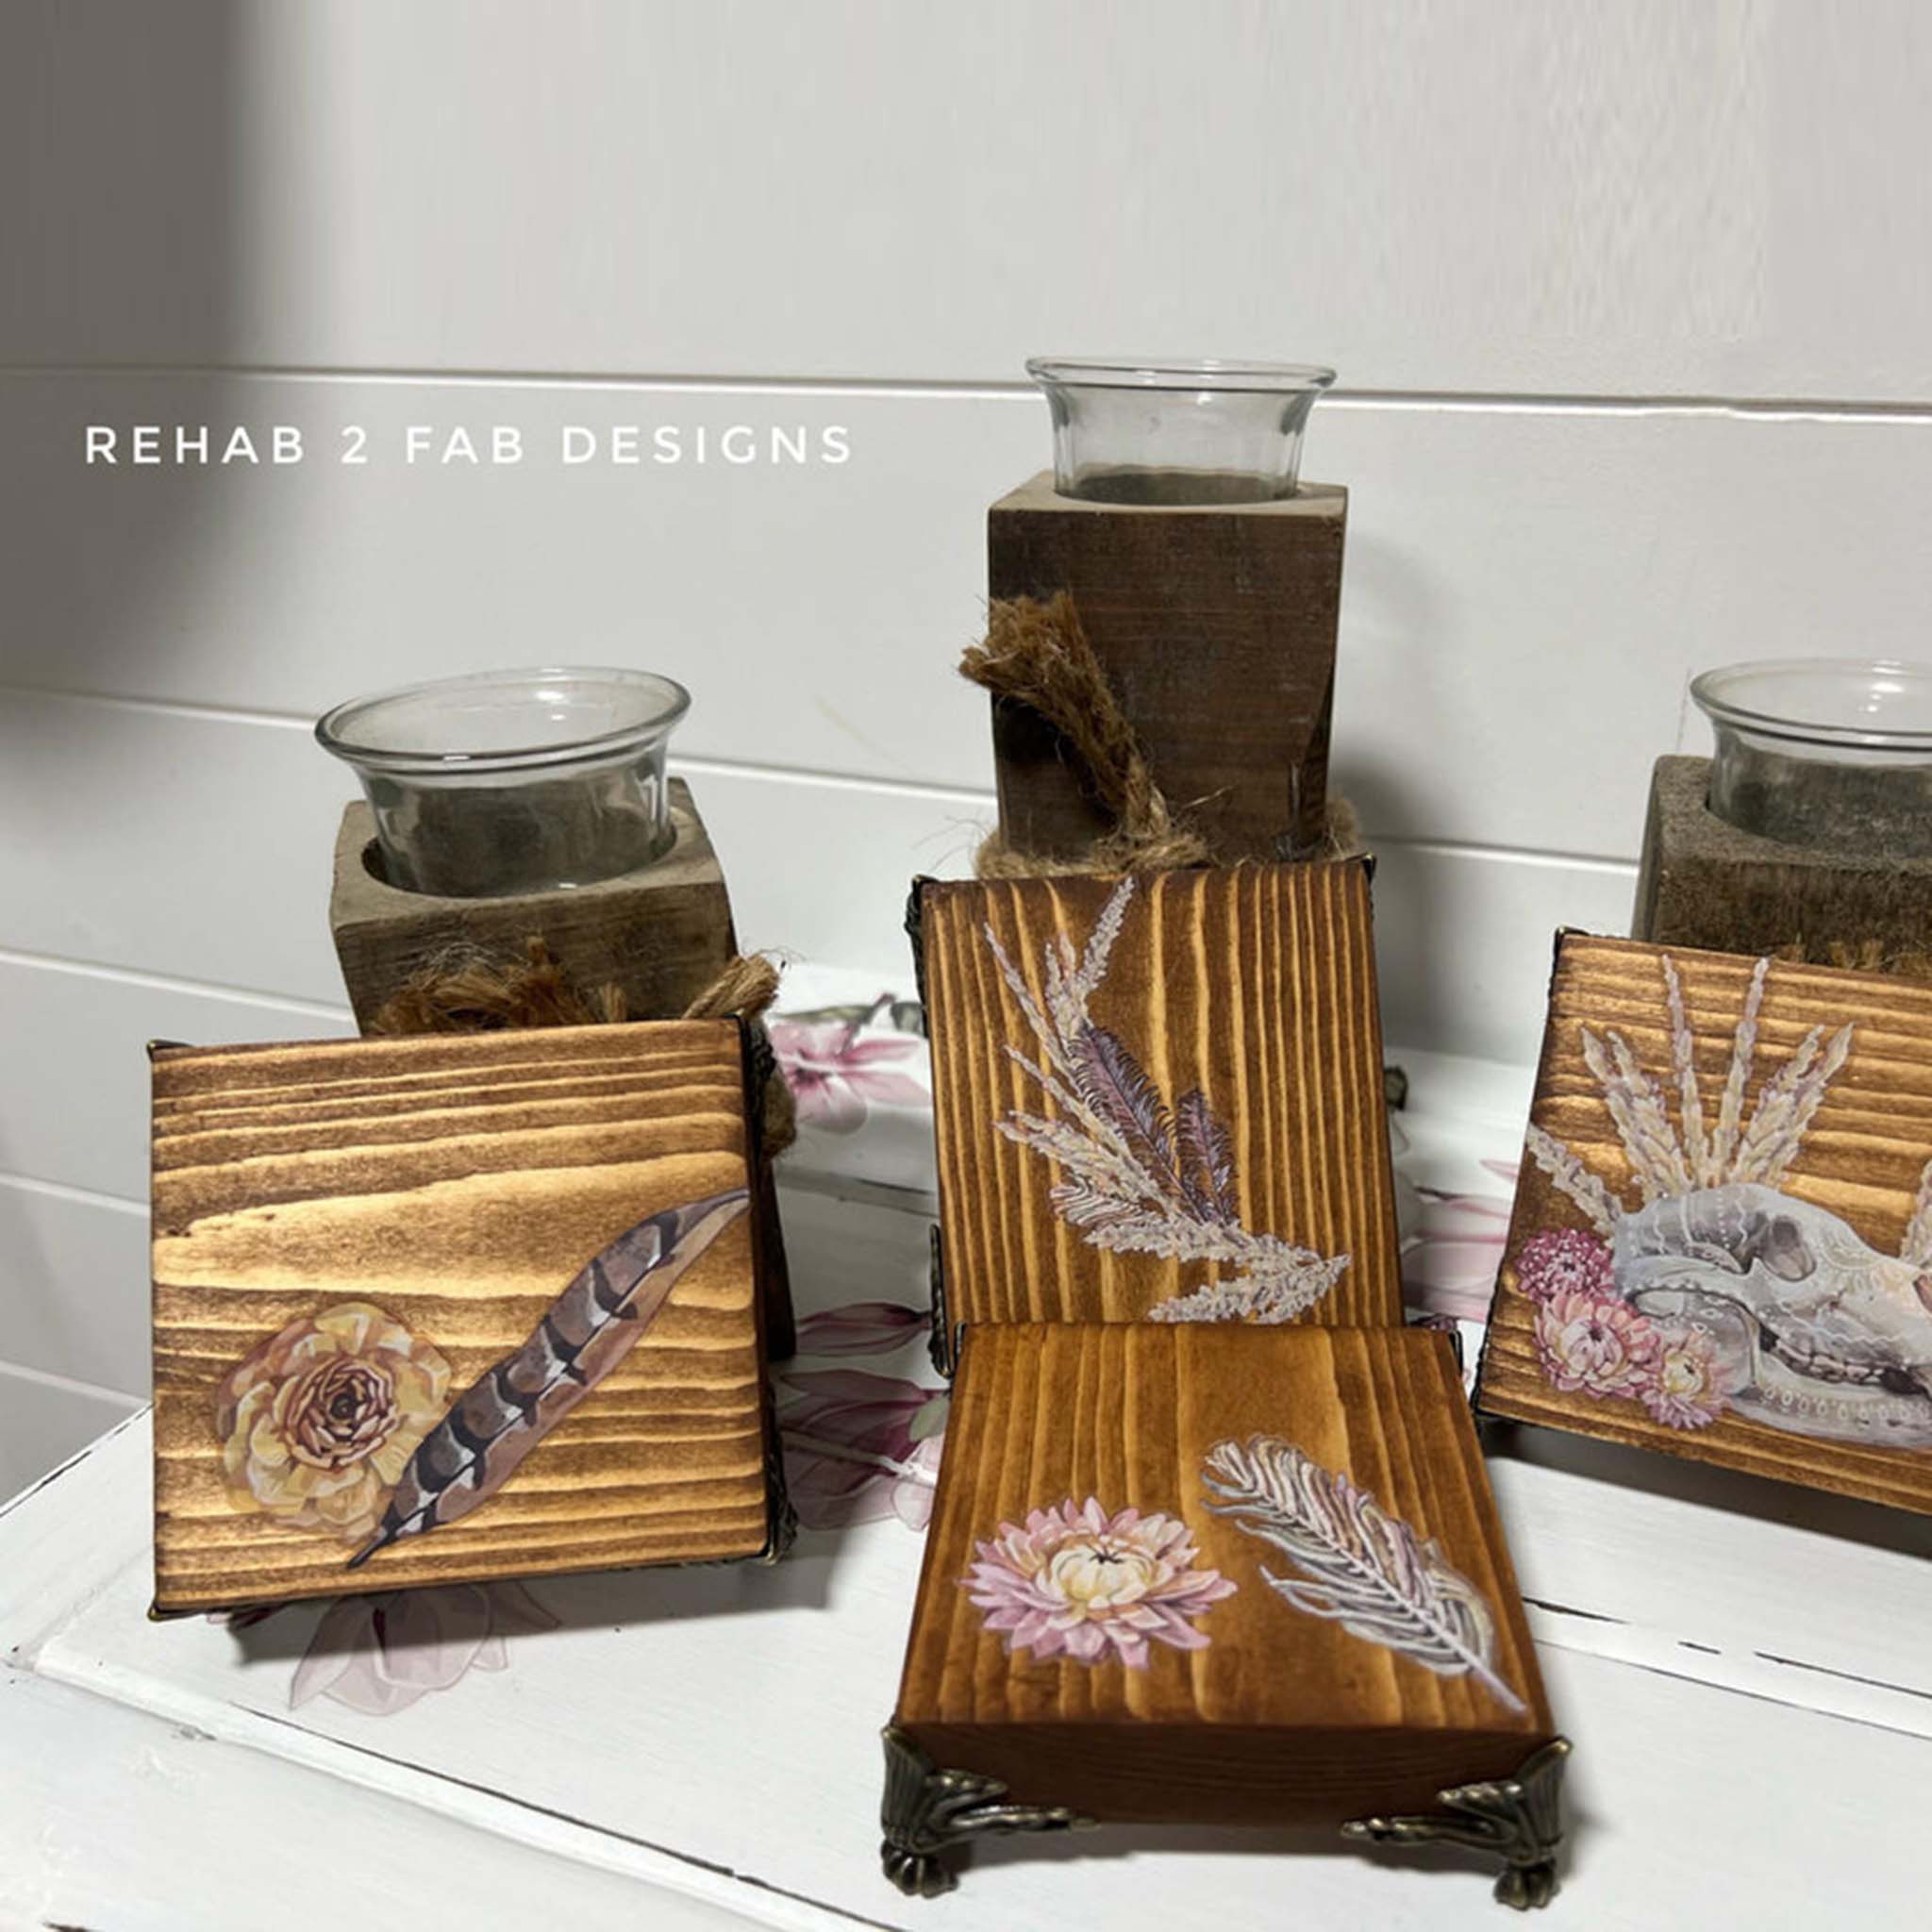 Four wood coasters created by Rehab 2 Fab Designs are stained a natural color and feature Belles & Whistles' Desert Moon small rub-on transfer on them.